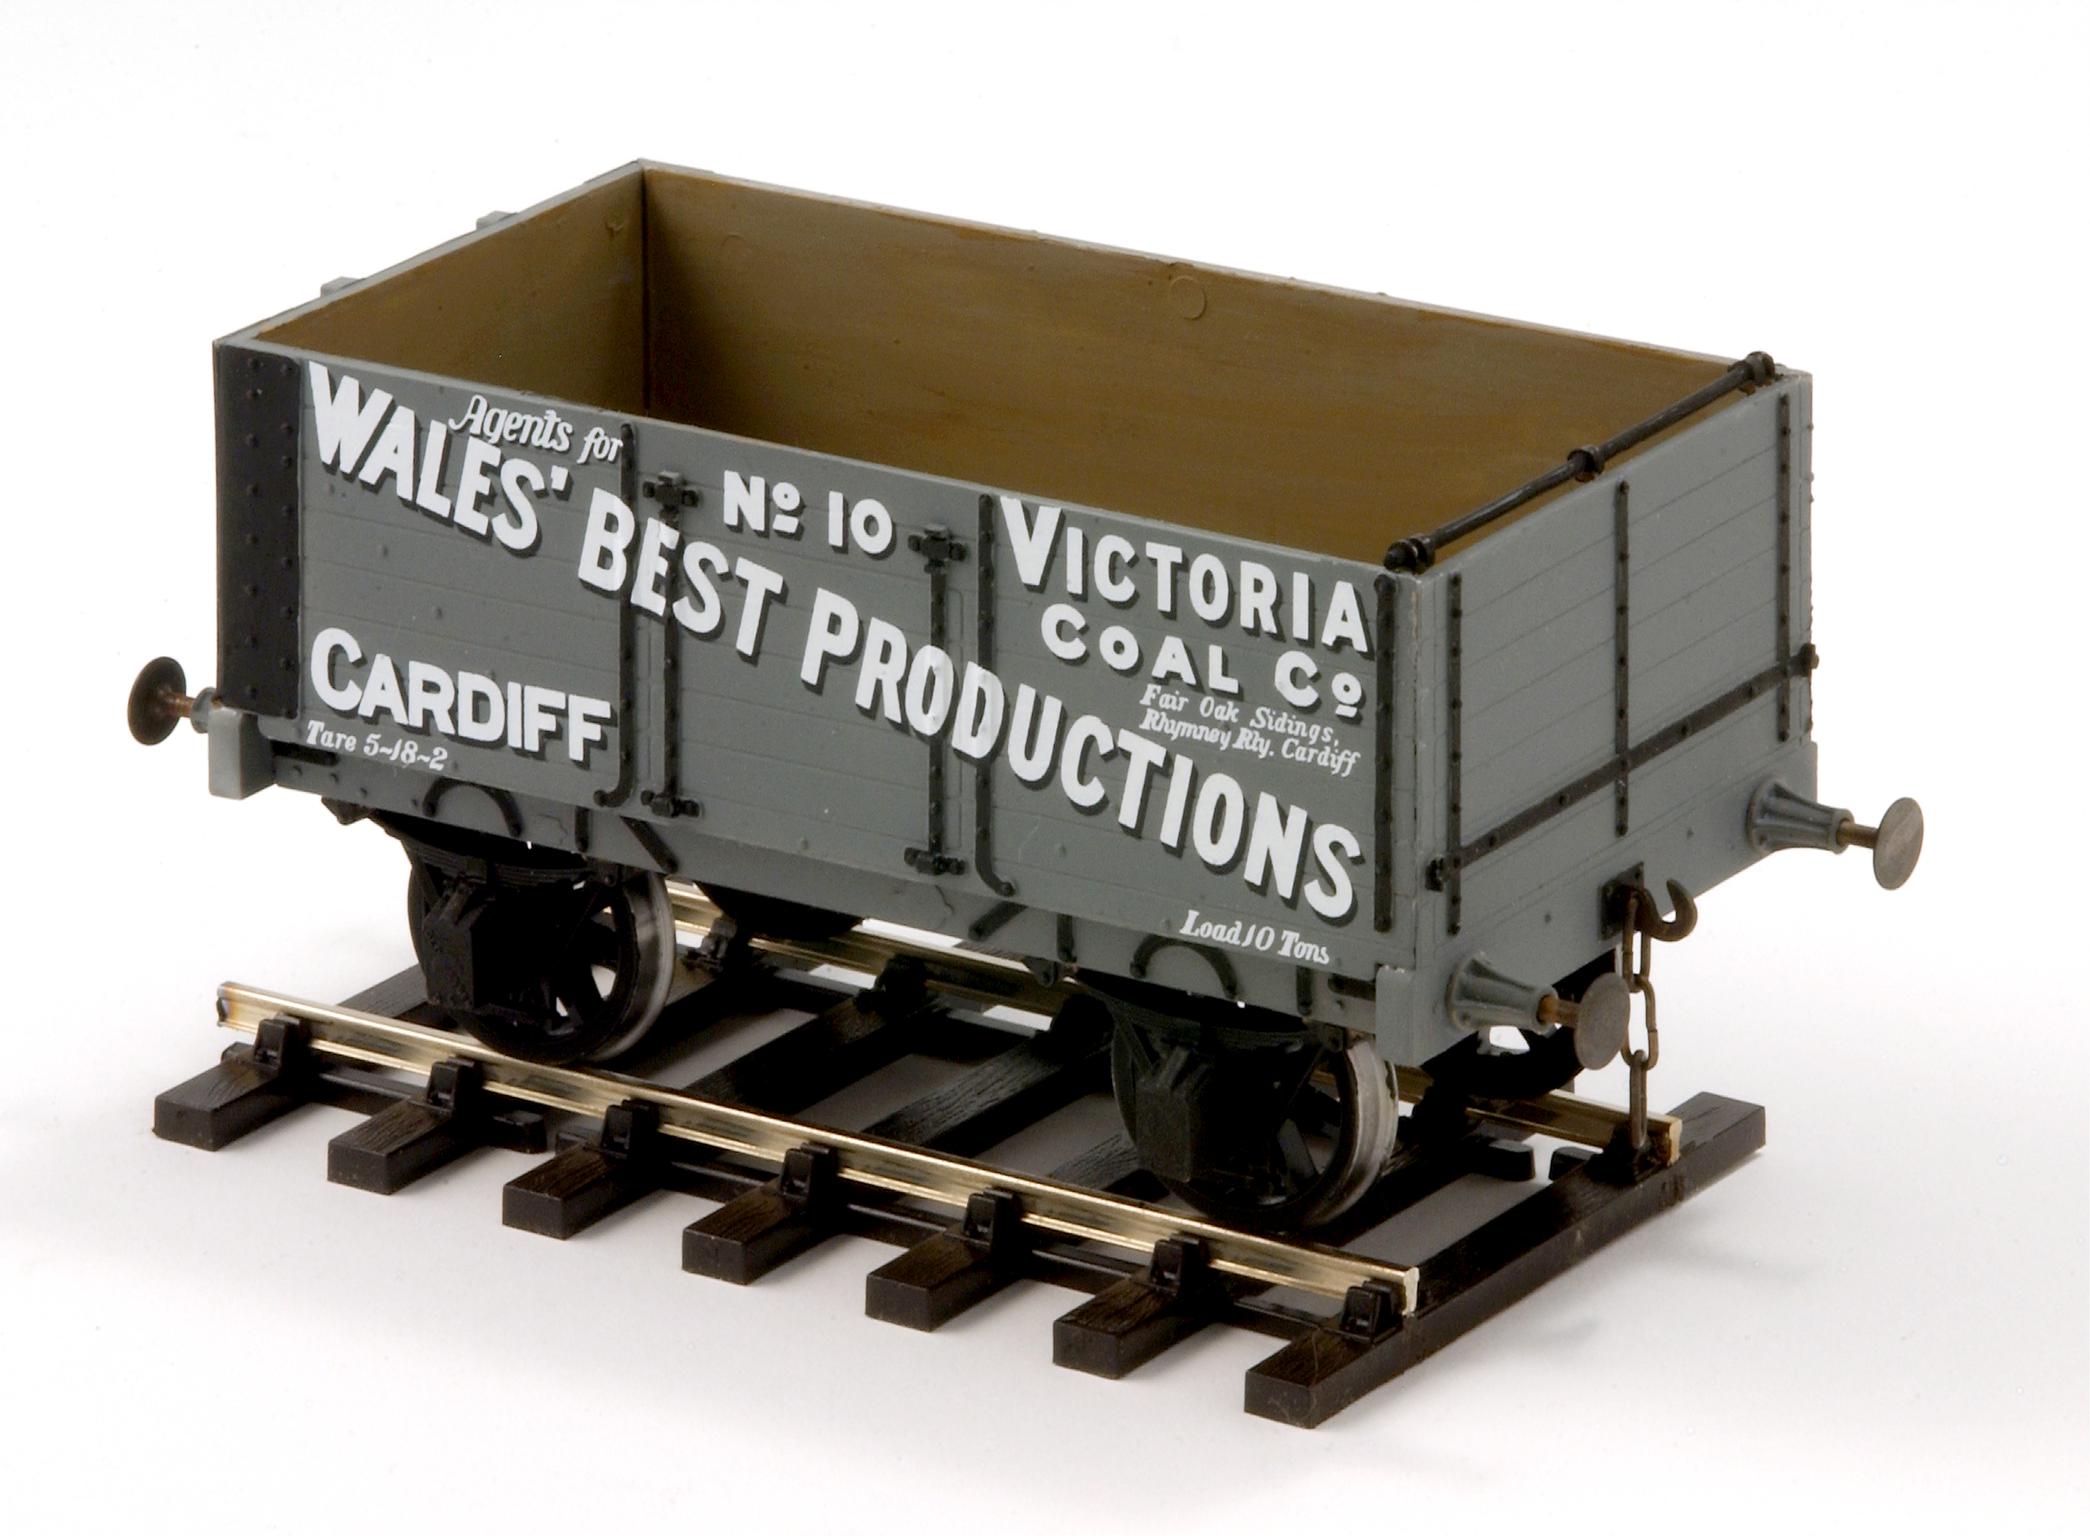 Wales' Best Productions, Cardiff, coal wagon model